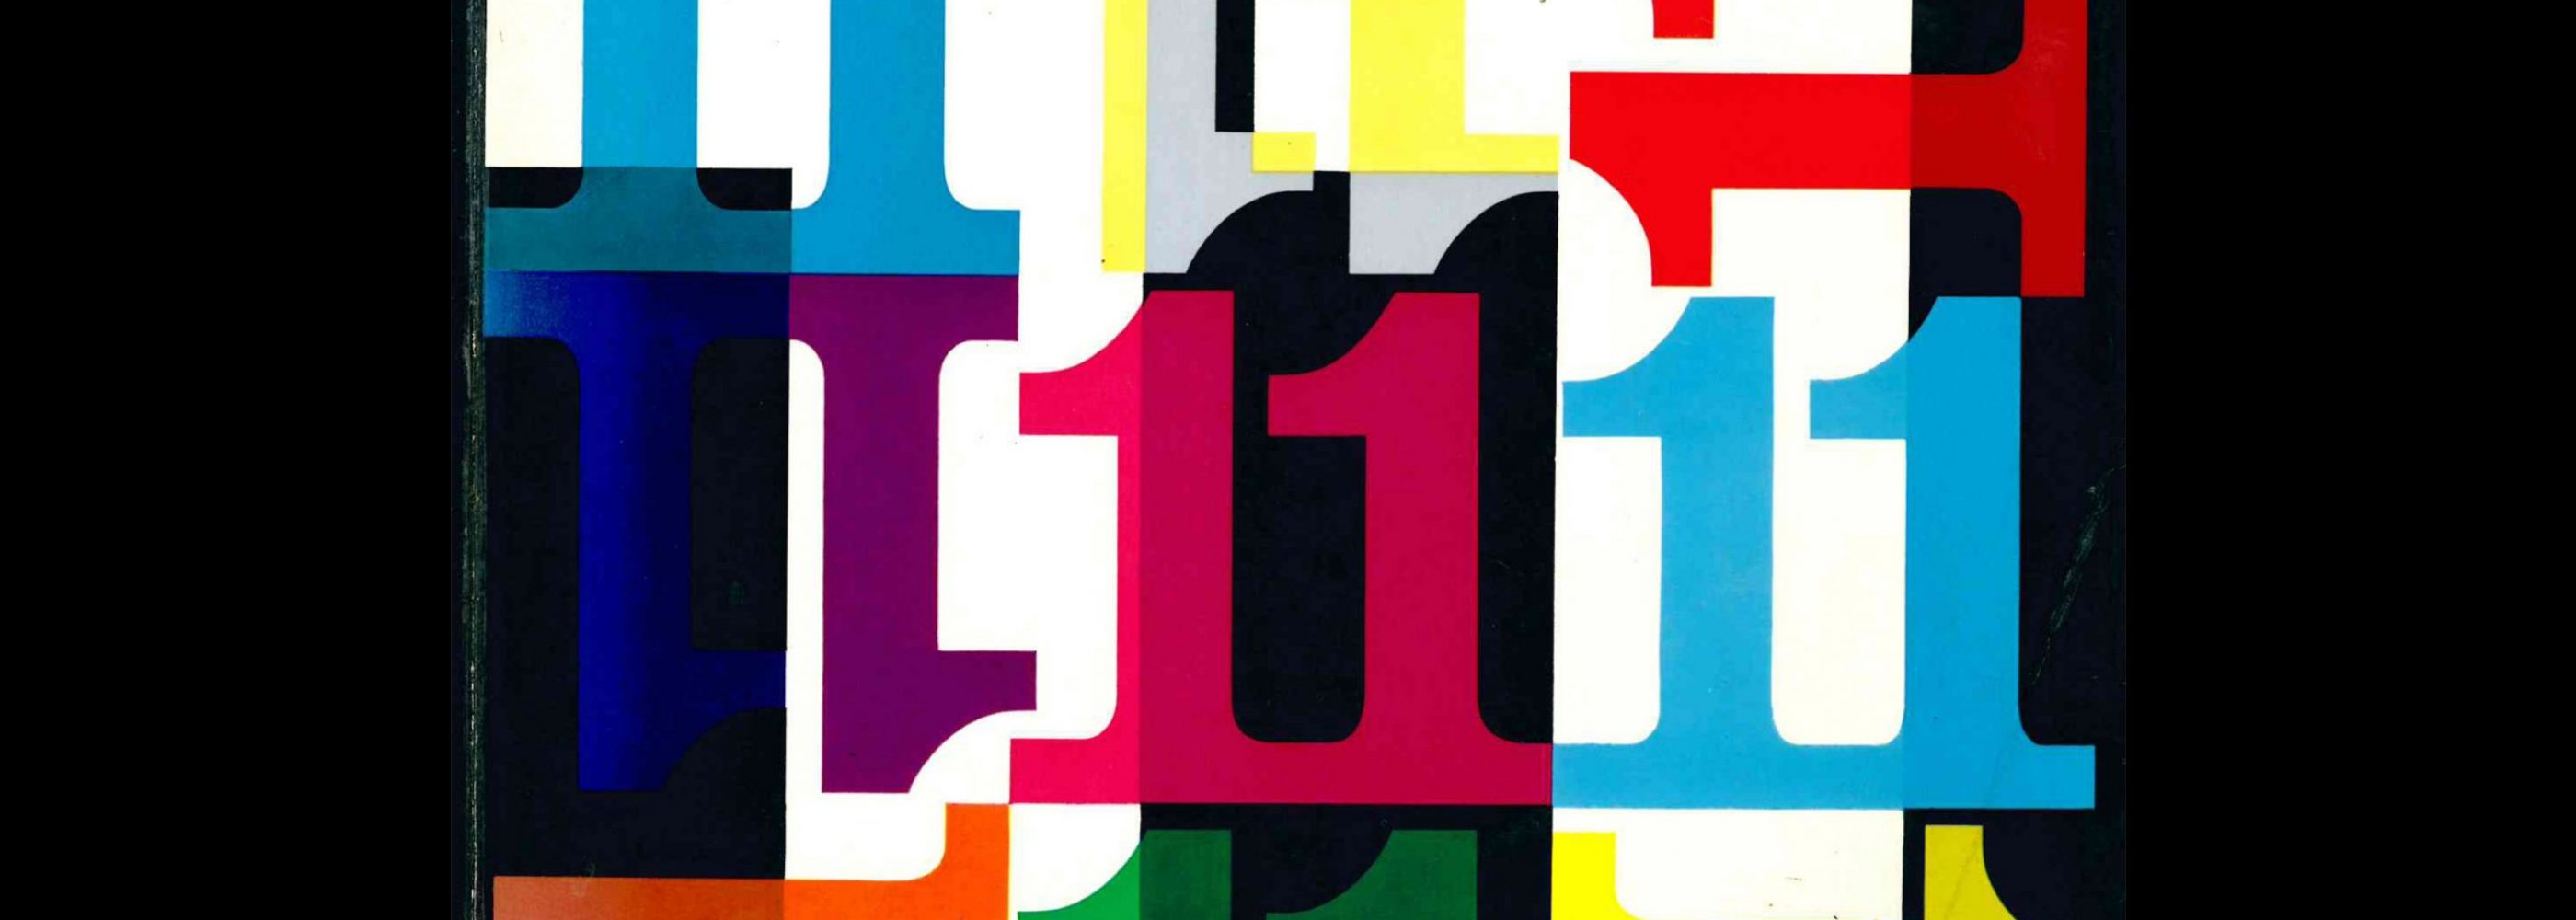 Publicité 11, Review of advertising and Graphic Art in Switzerland, 1961. Cover design by Pierre Monnerat